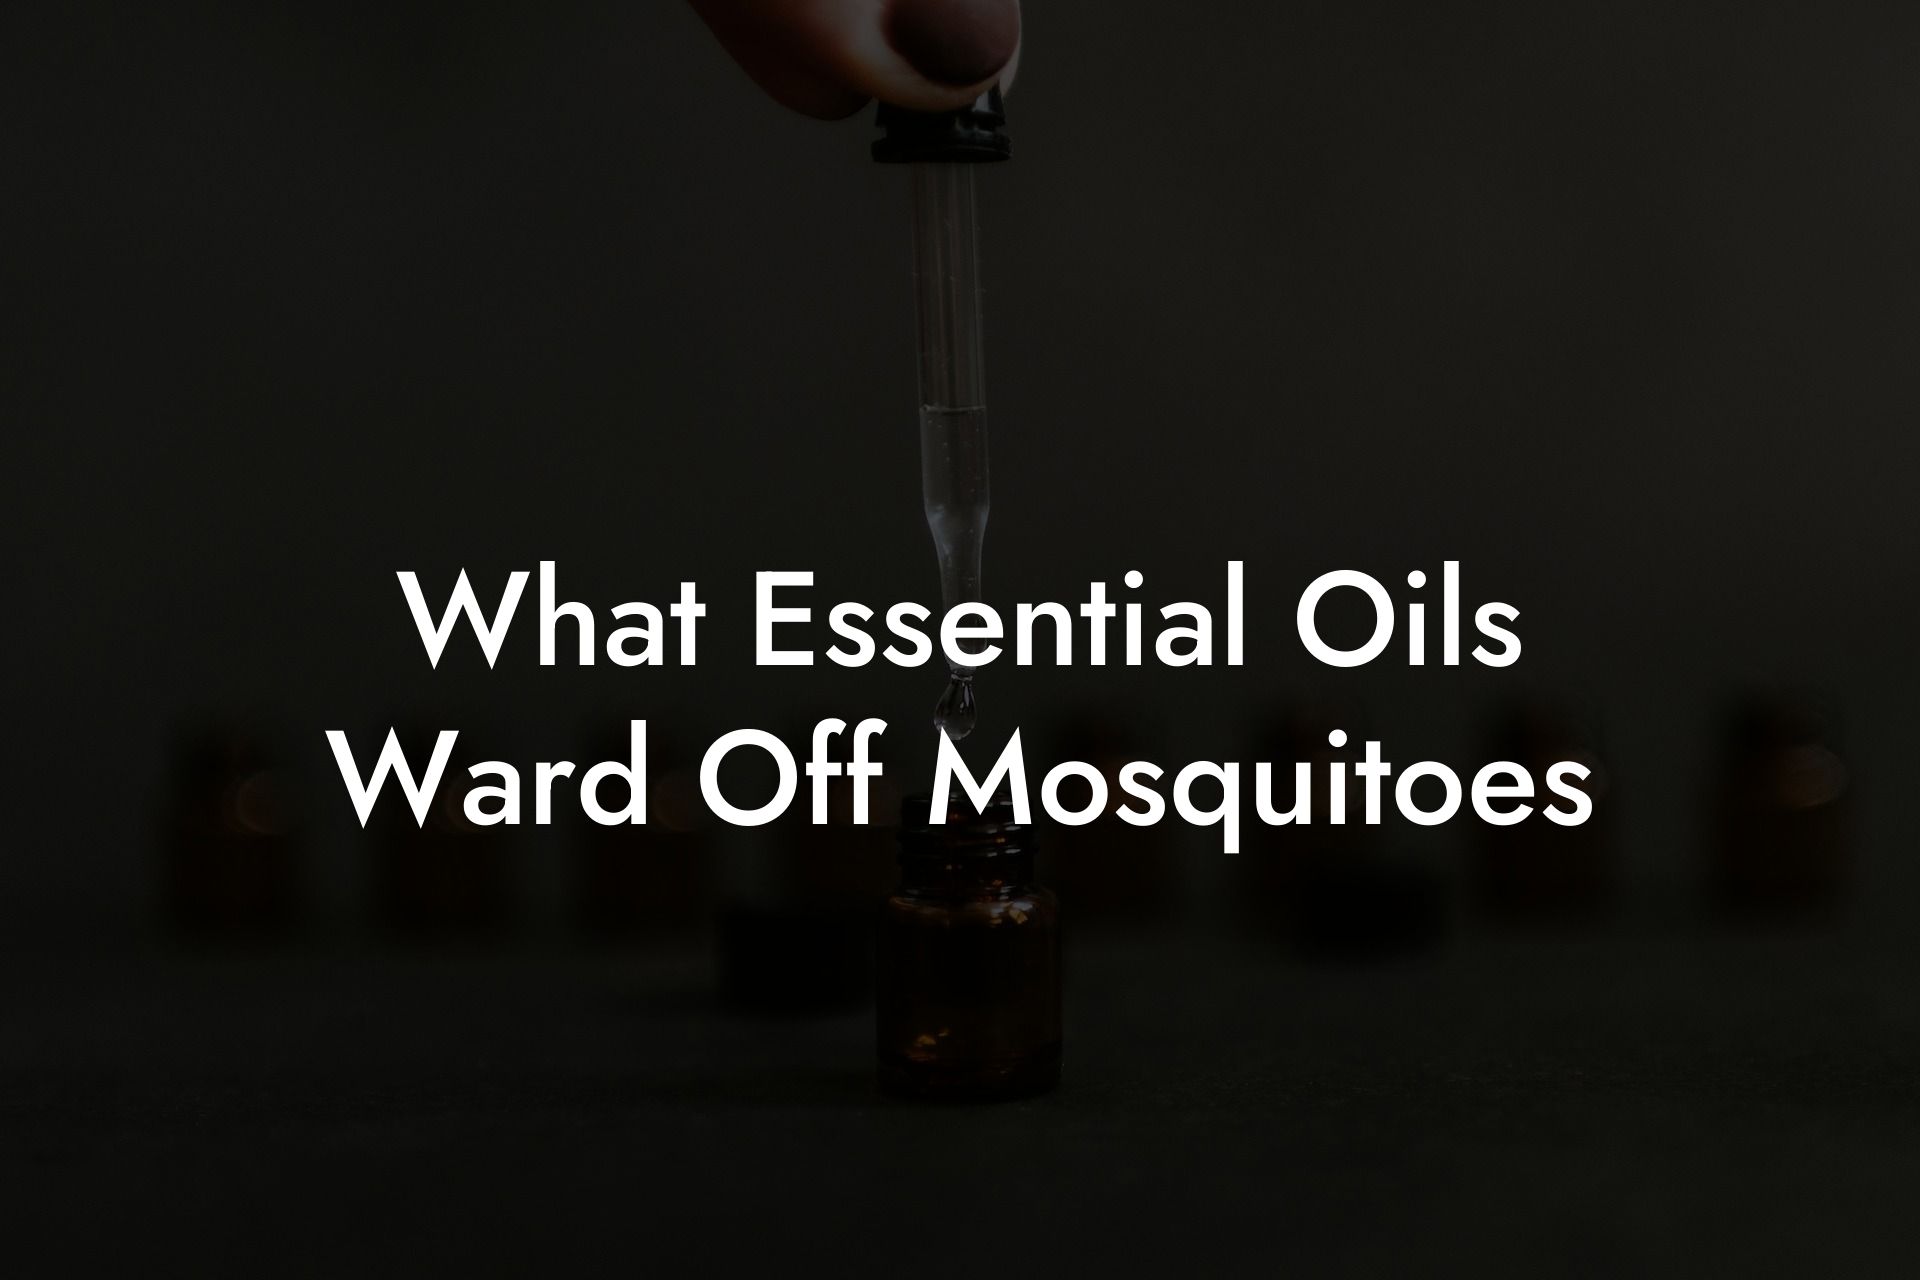 What Essential Oils Ward Off Mosquitoes